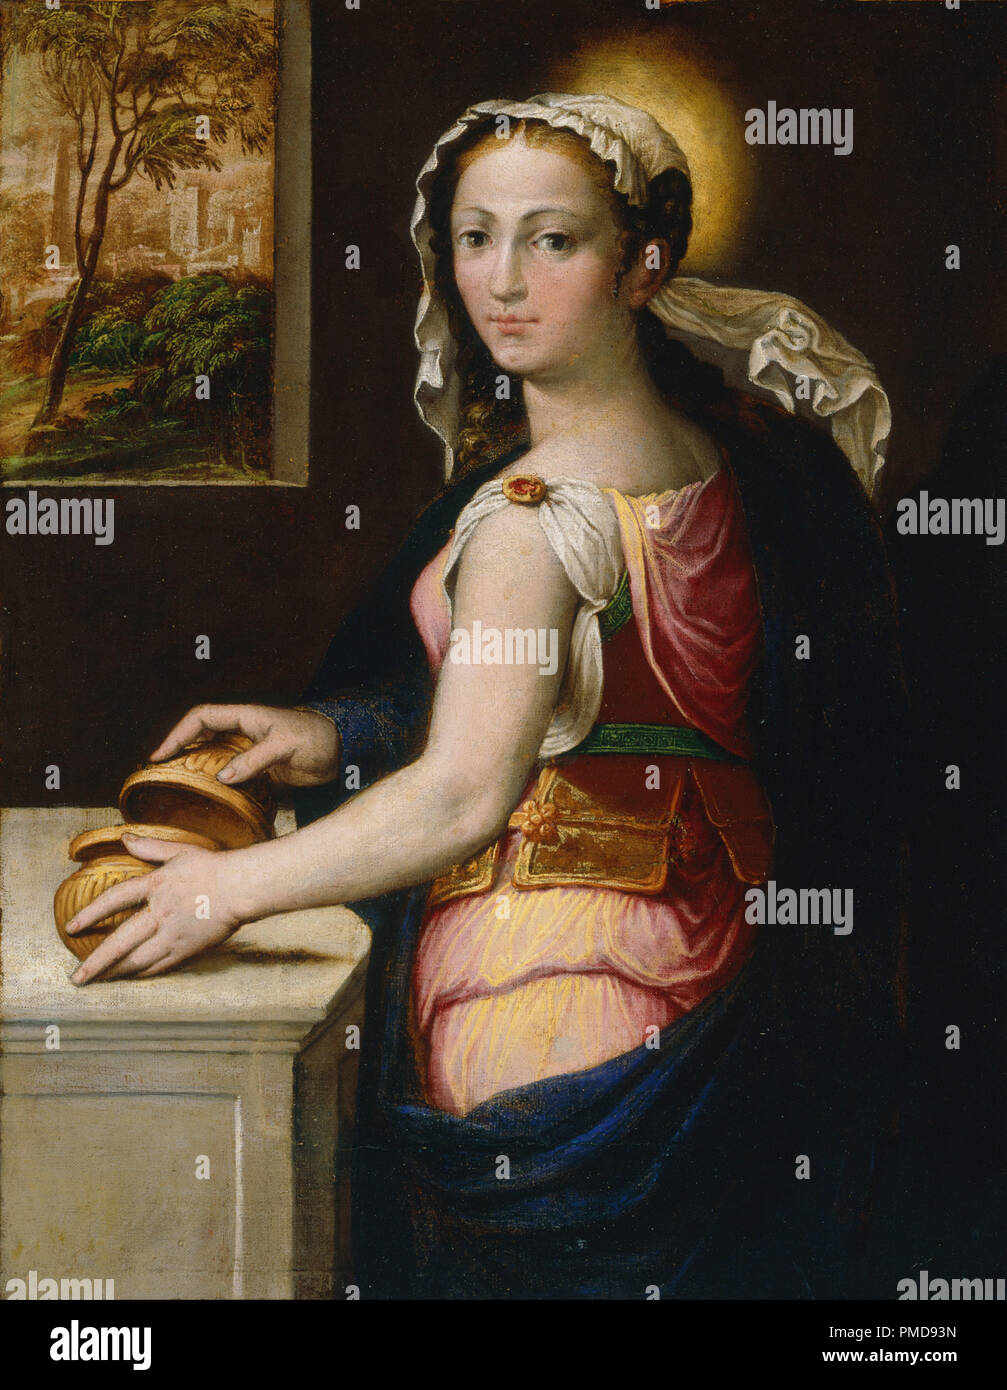 Mary Magdalene. Date/Period: From 1522 until 1590. Painting. Oil on canvas. Height: 665 mm (26.18 in); Width: 572 mm (22.51 in). Author: Bernardino Campi. CAMPI, BERNARDINO. Stock Photo